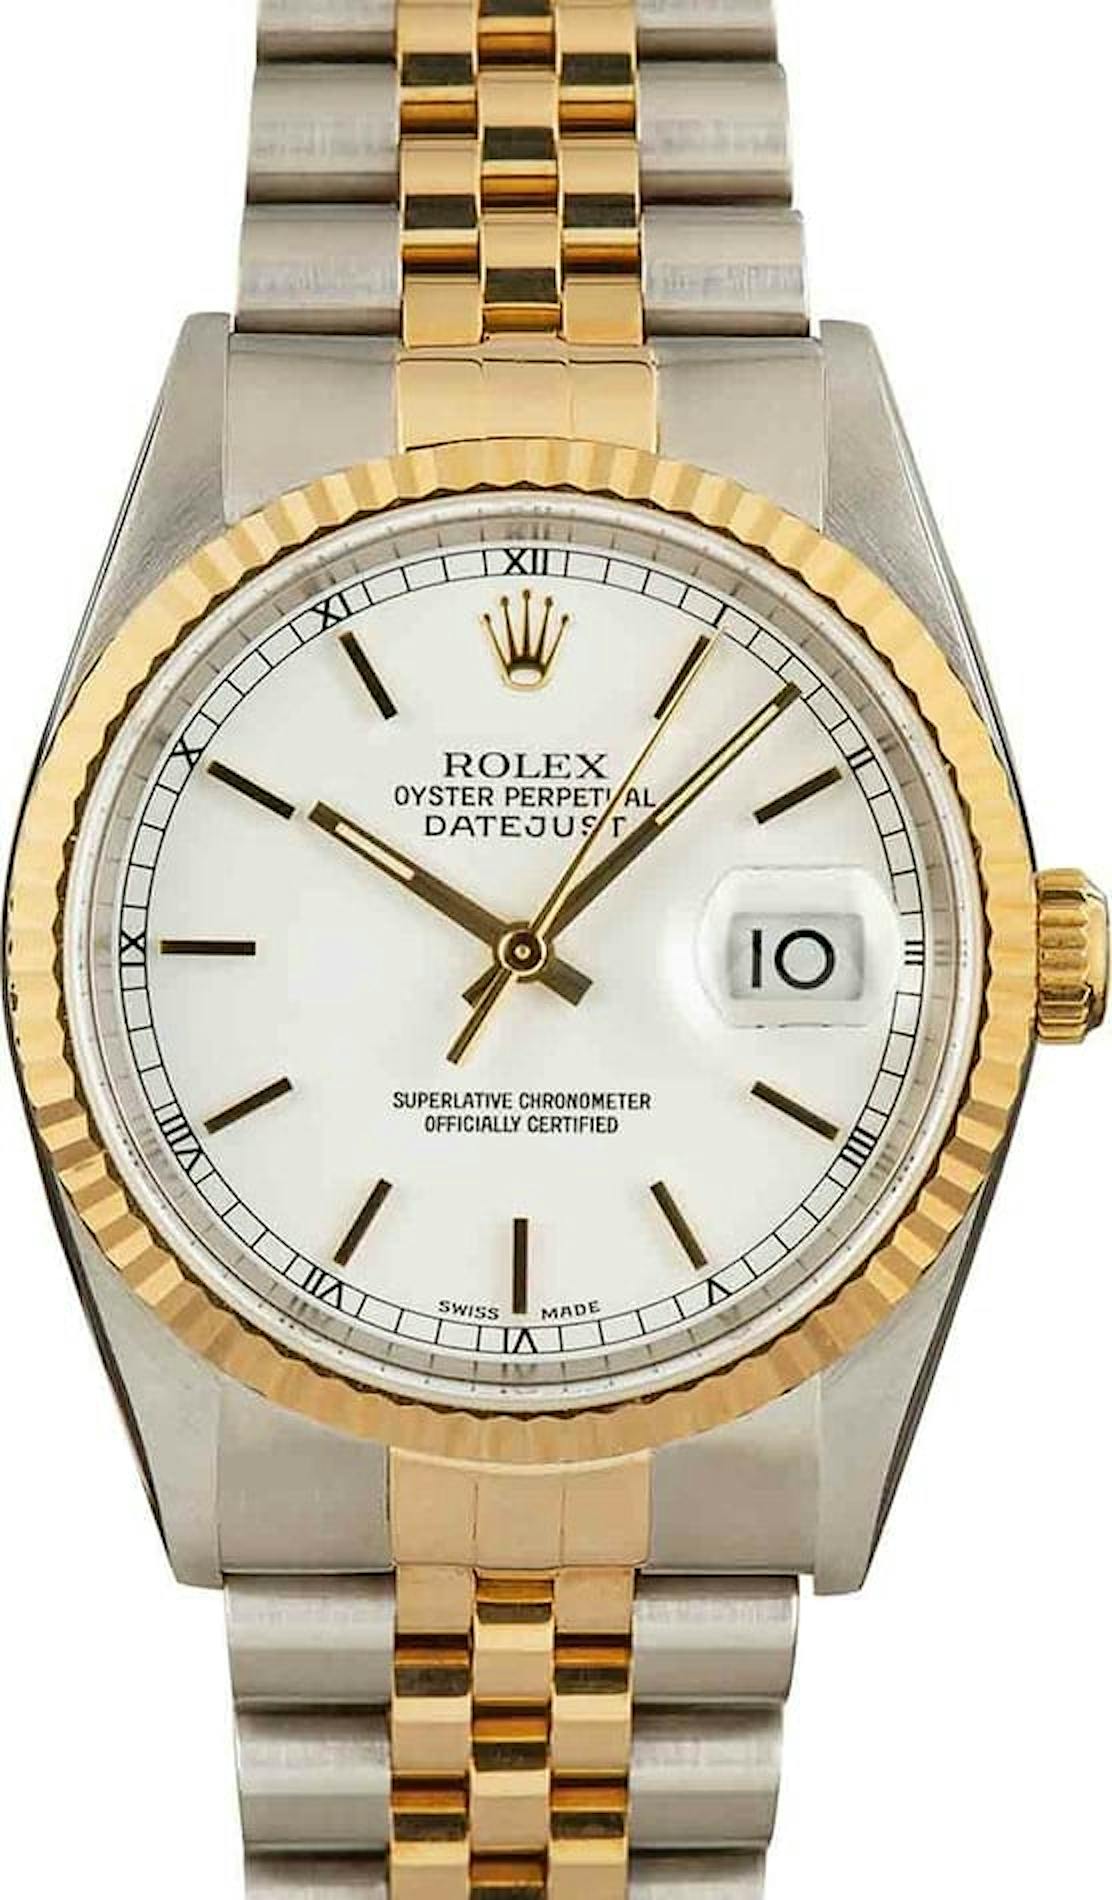 Pre-Owned Rolex Datejust 16233 White Dial Watch